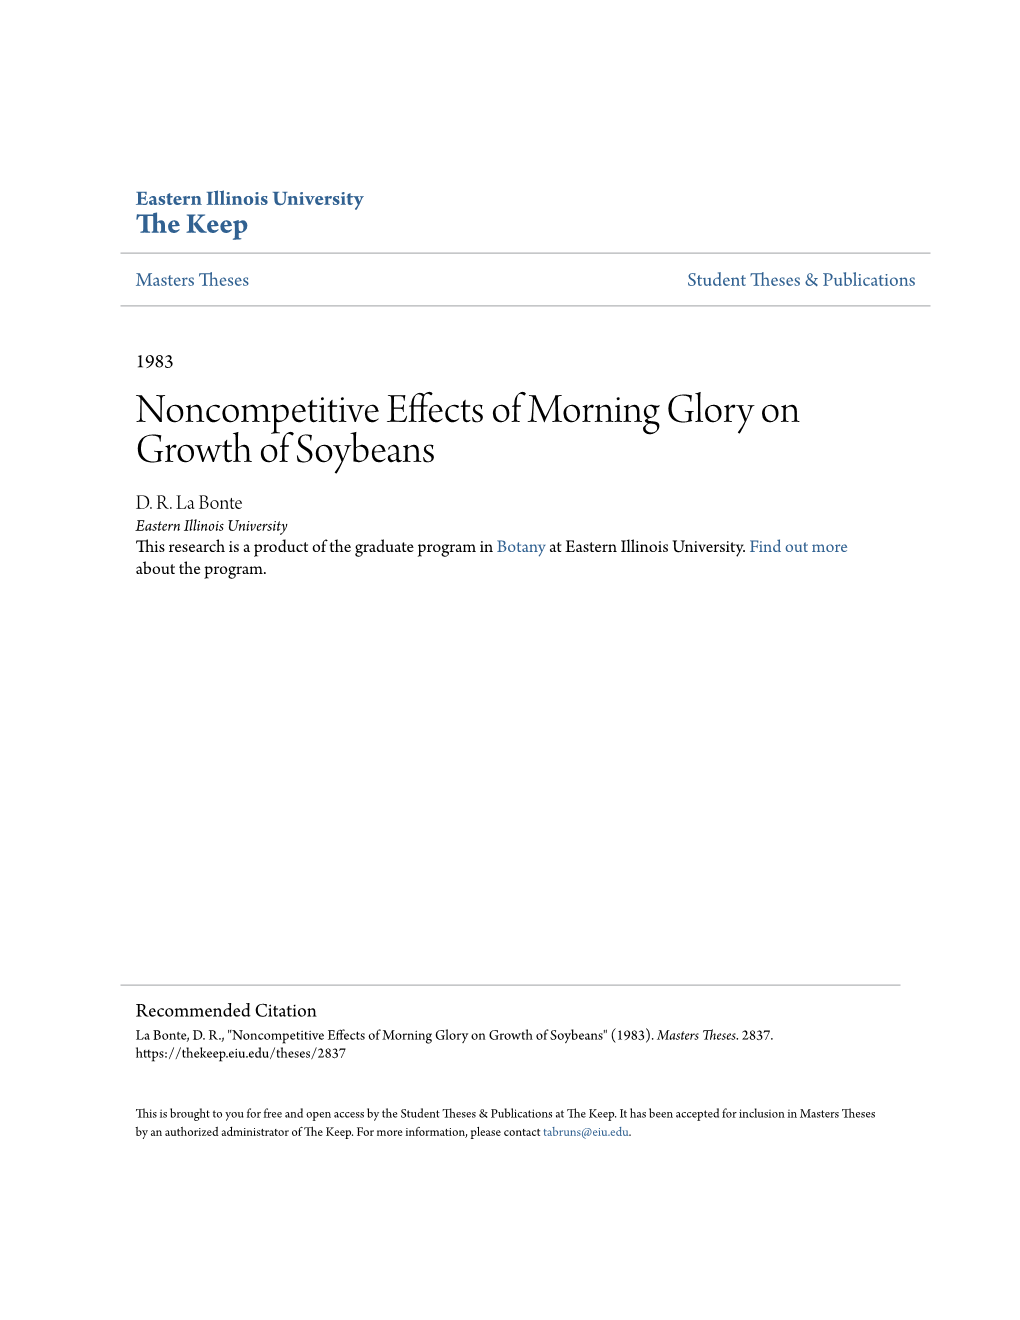 Noncompetitive Effects of Morning Glory on Growth of Soybeans D